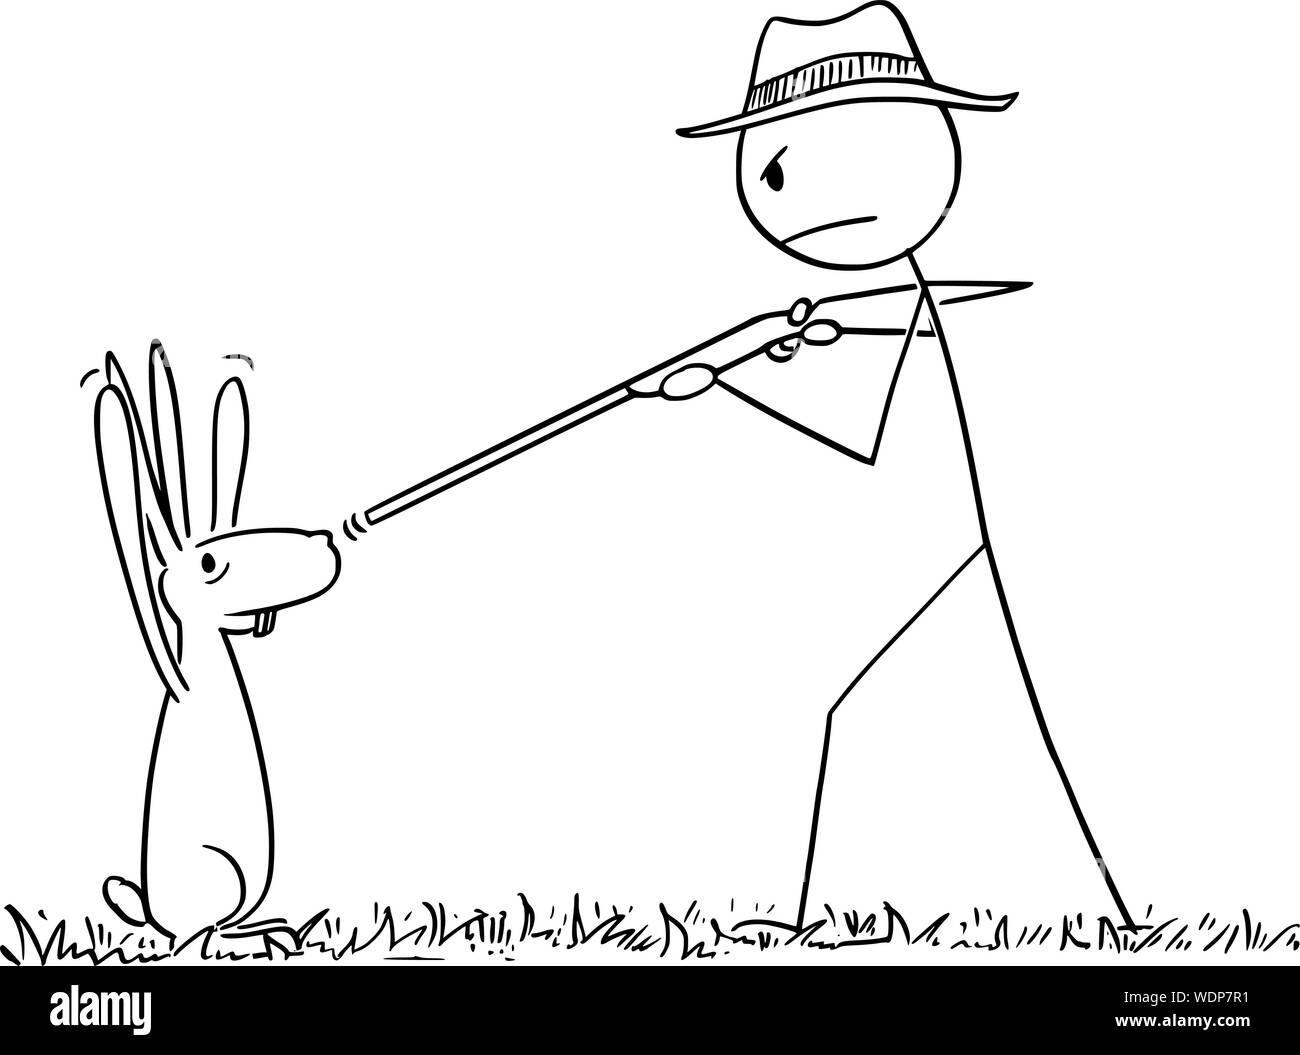 Vector cartoon stick figure drawing conceptual illustration of man with rifle or hunter pointing his gun at rabbit or hare or jackrabbit. Animal surrendered with paws or hands up. Stock Vector